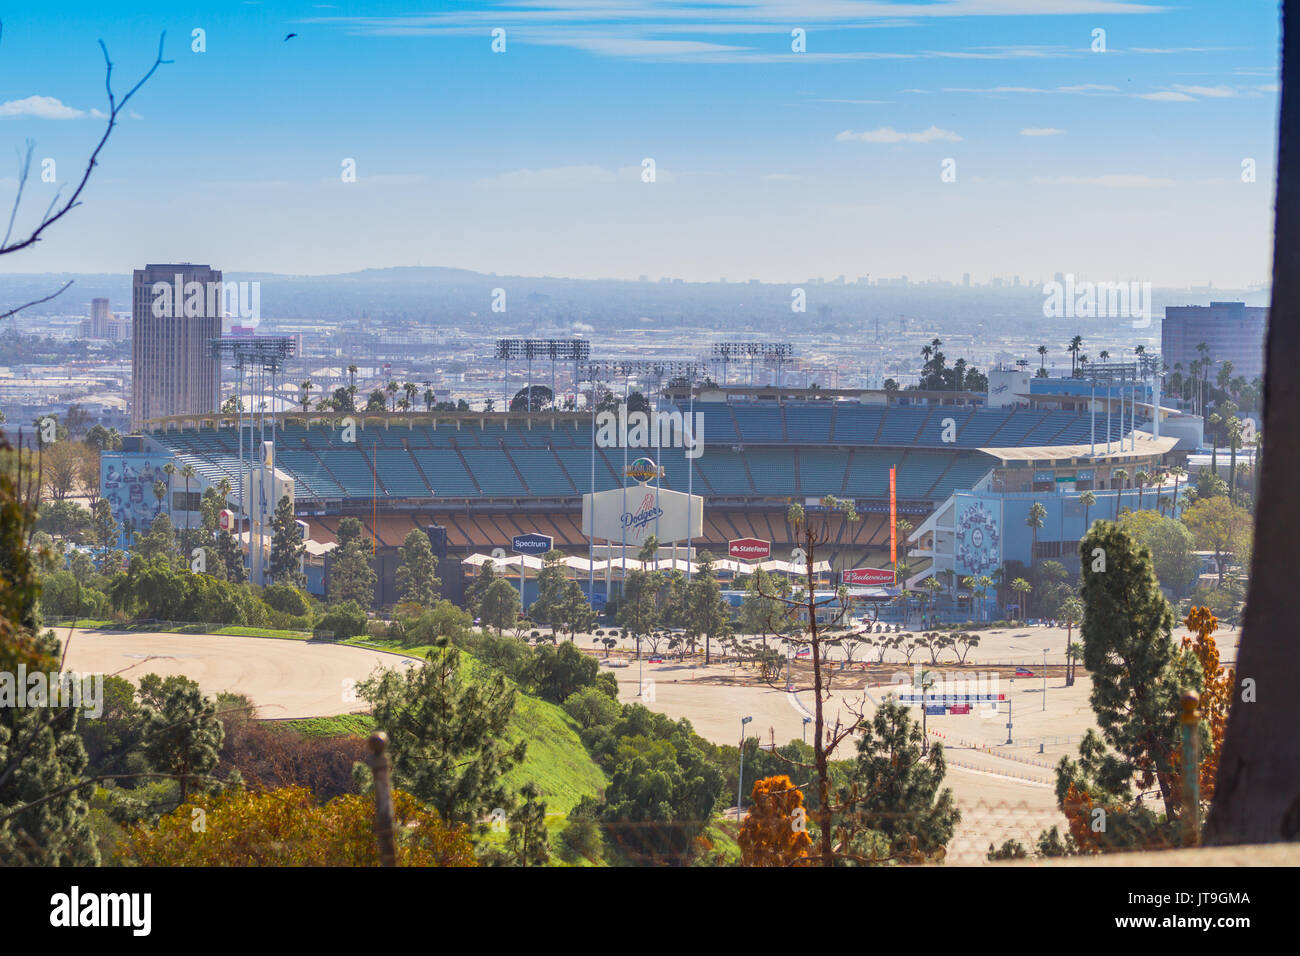 Aerial view from helicopter of Los Angeles Dodger Stadium in Elysian Park, with the skyscraper skyline of Los Angeles. Stock Photo